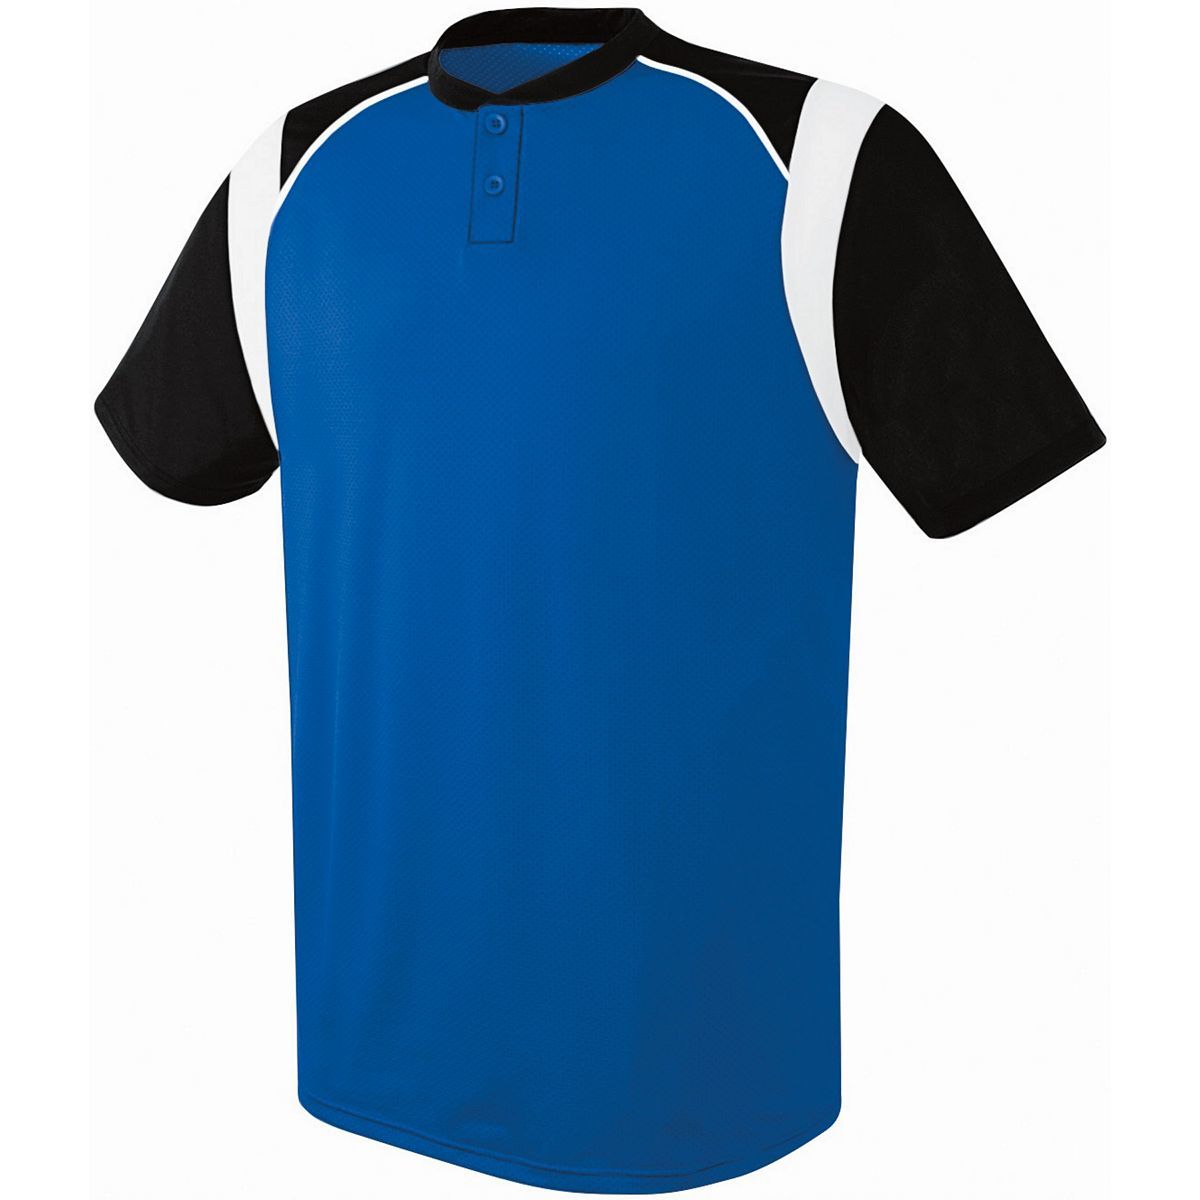 Augusta Sportswear Wildcard Two-Button Jersey in Royal/Black/White  -Part of the Adult, Adult-Jersey, Augusta-Products, Baseball, Shirts, All-Sports, All-Sports-1 product lines at KanaleyCreations.com